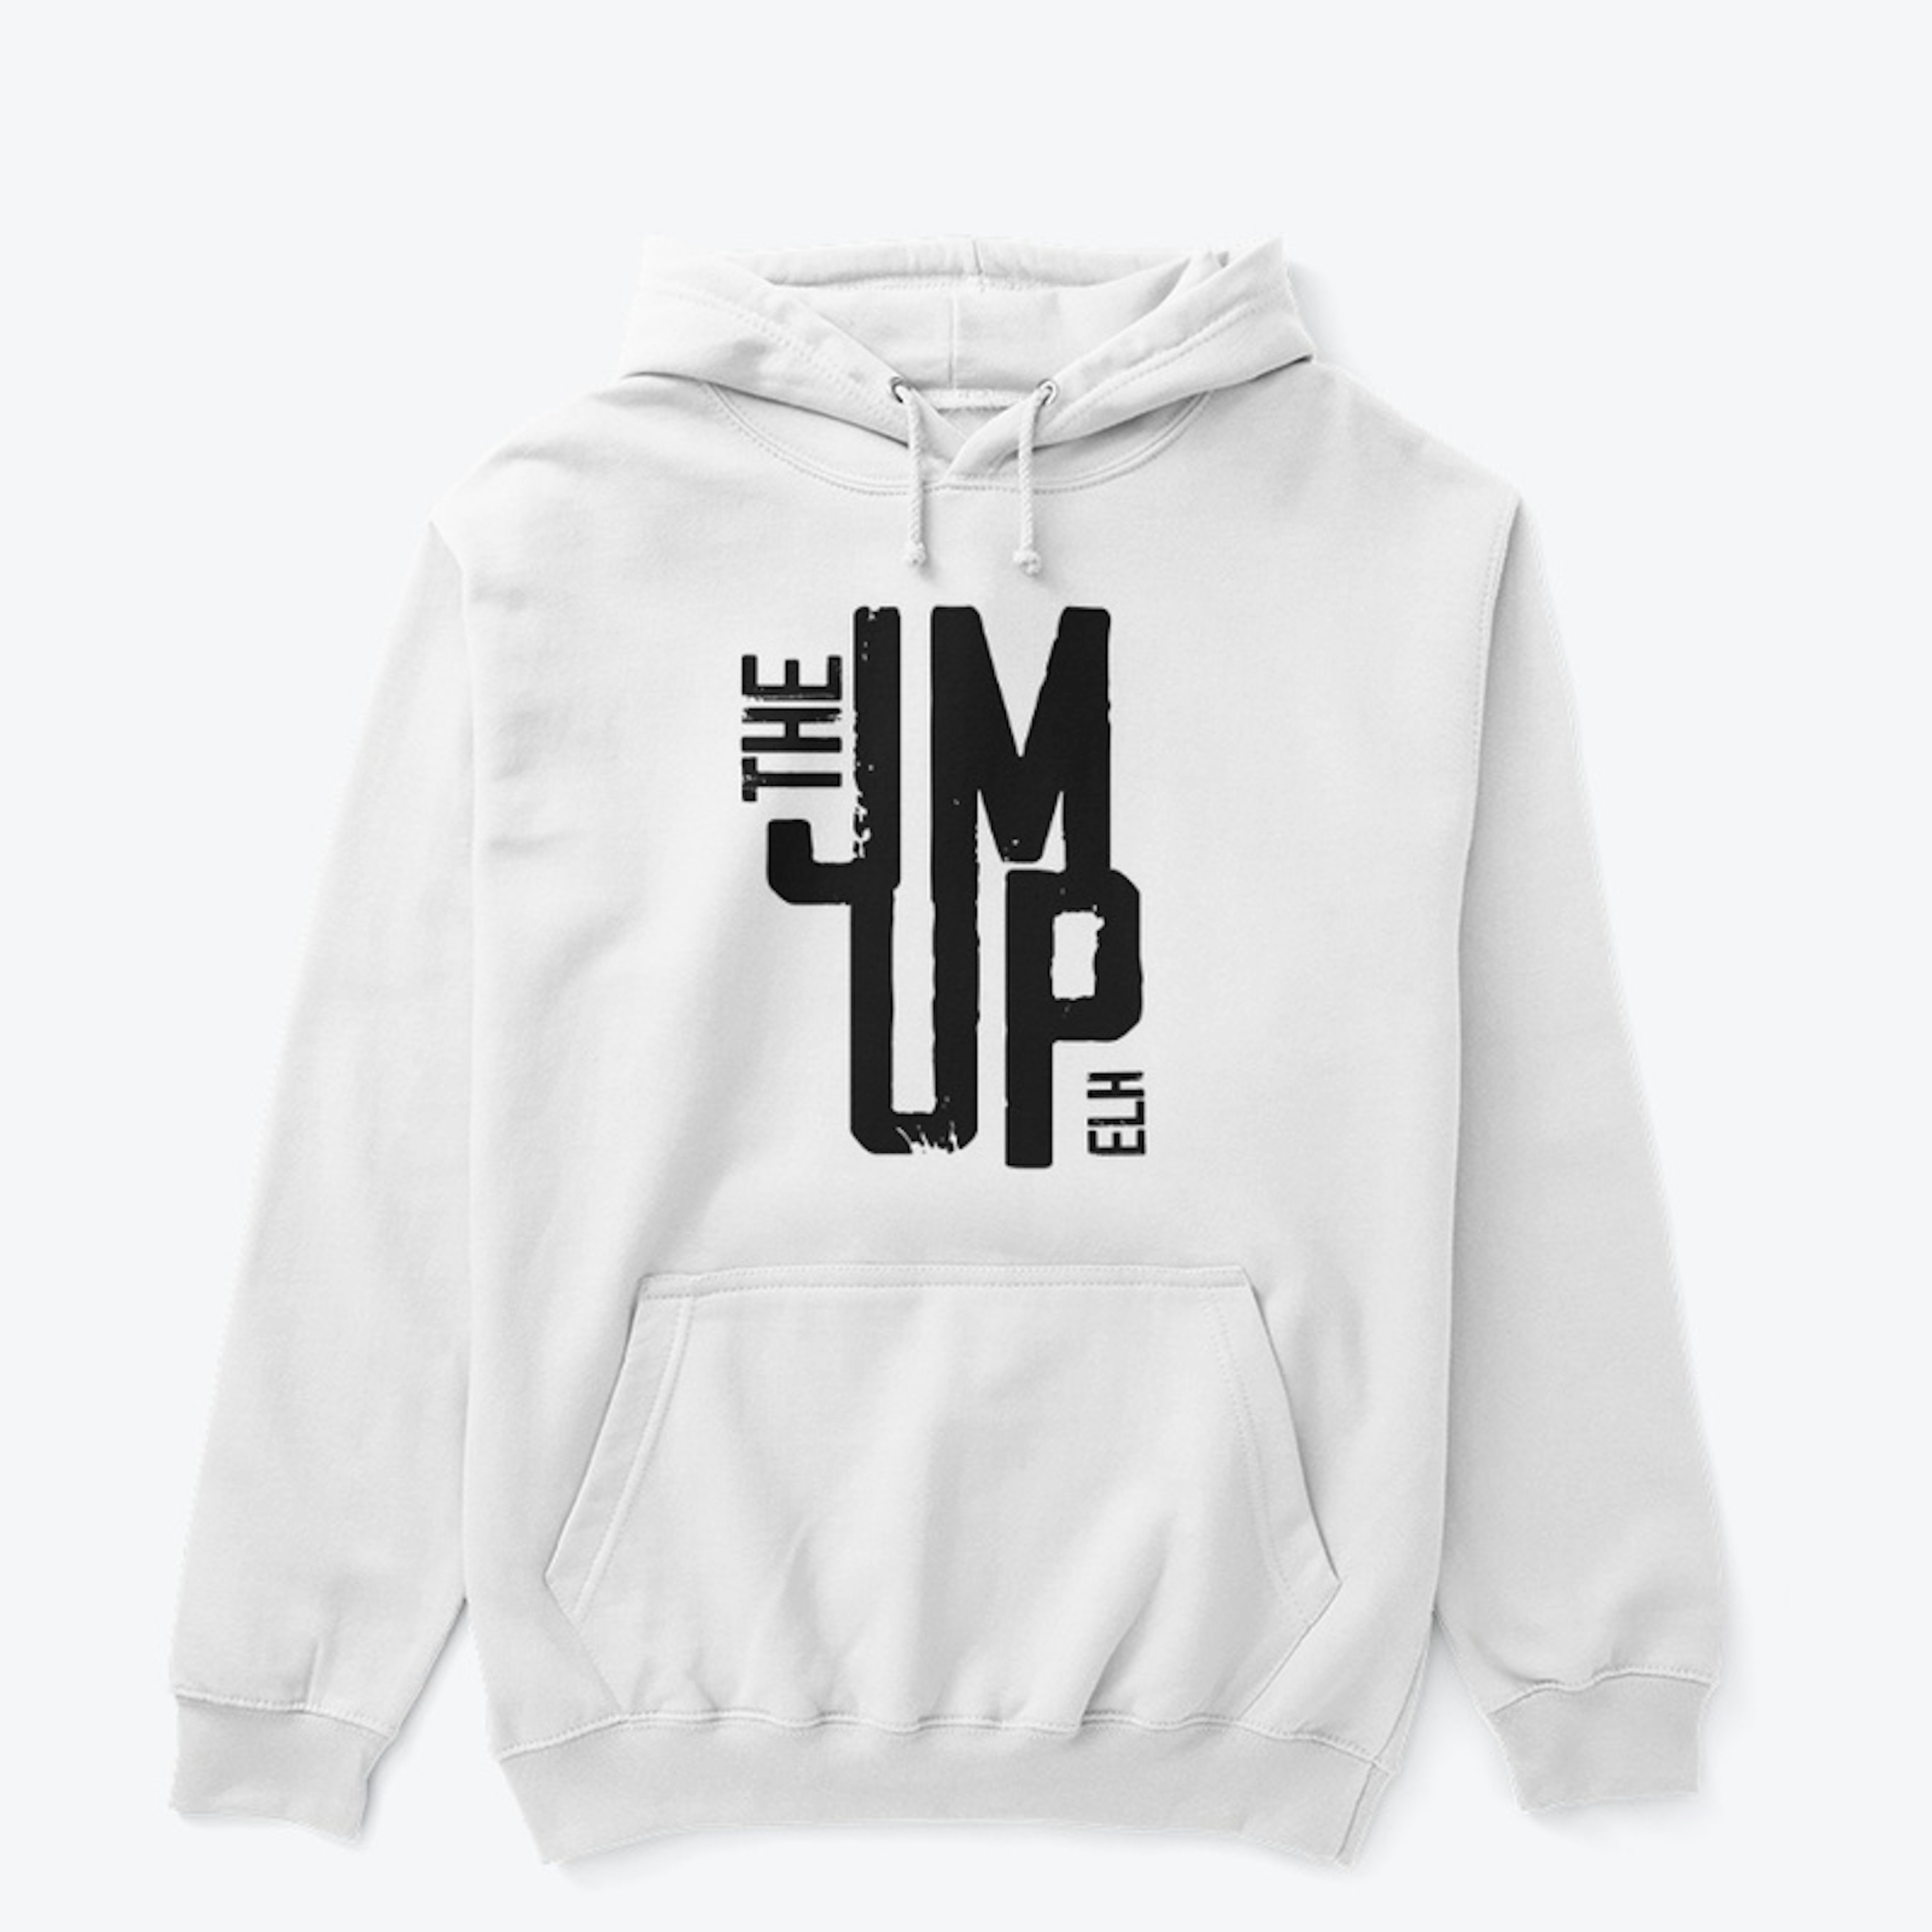 "THE JUMP" Collection